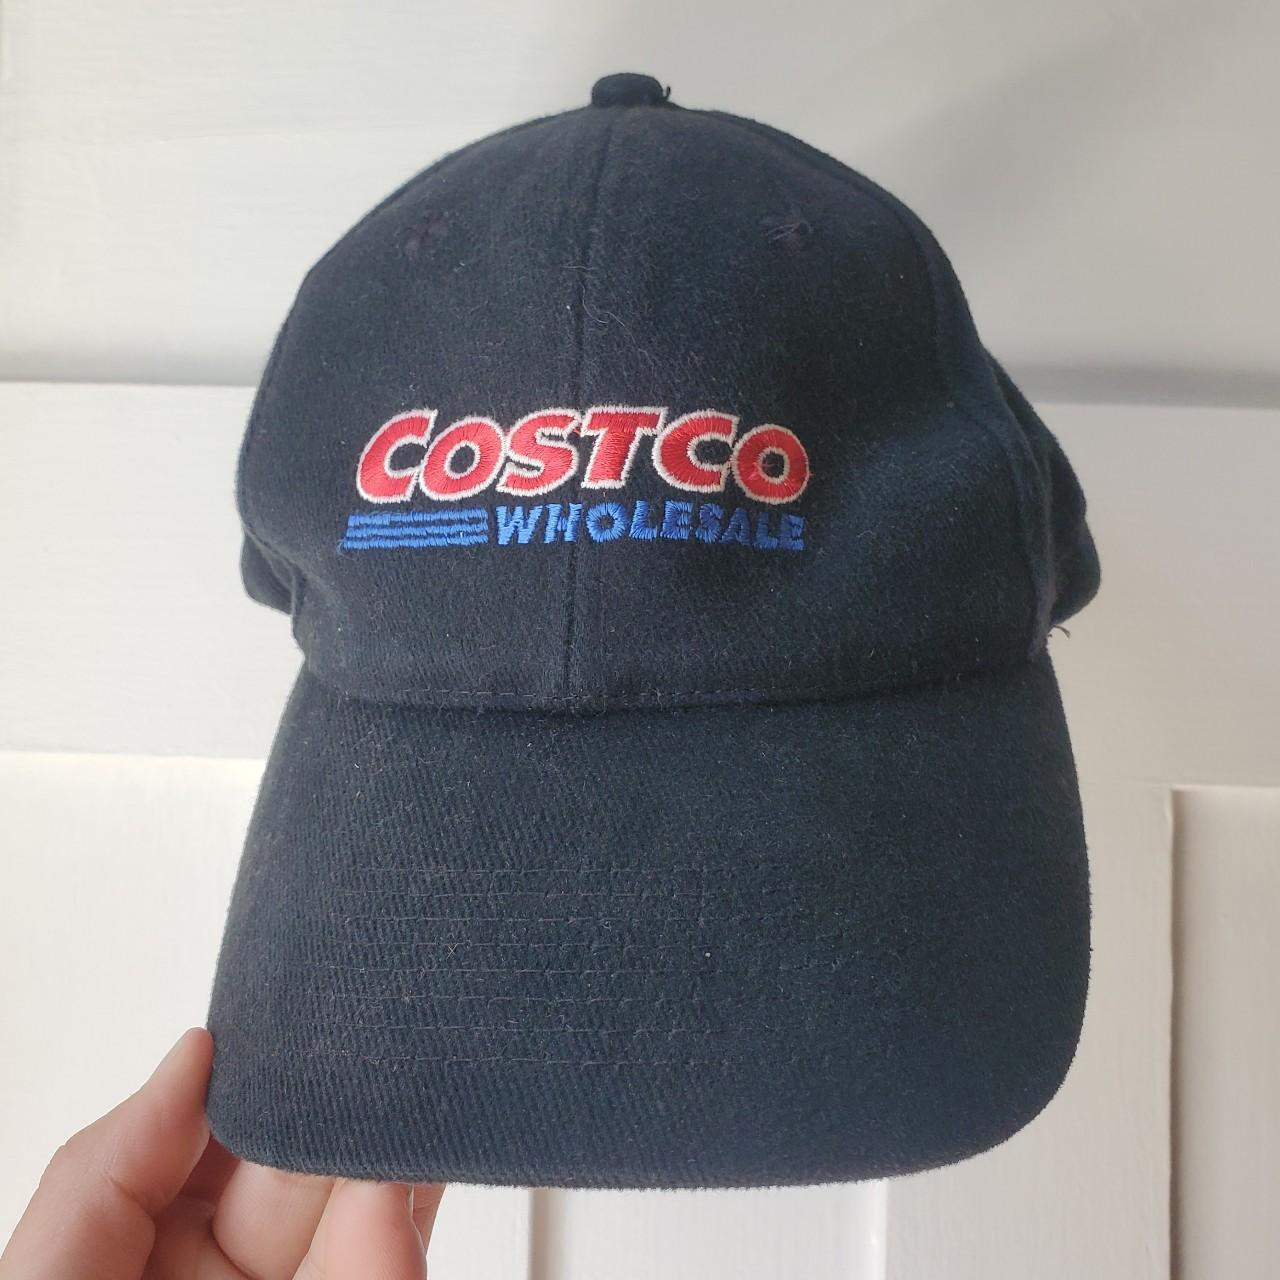 item listed by thriftchoppe